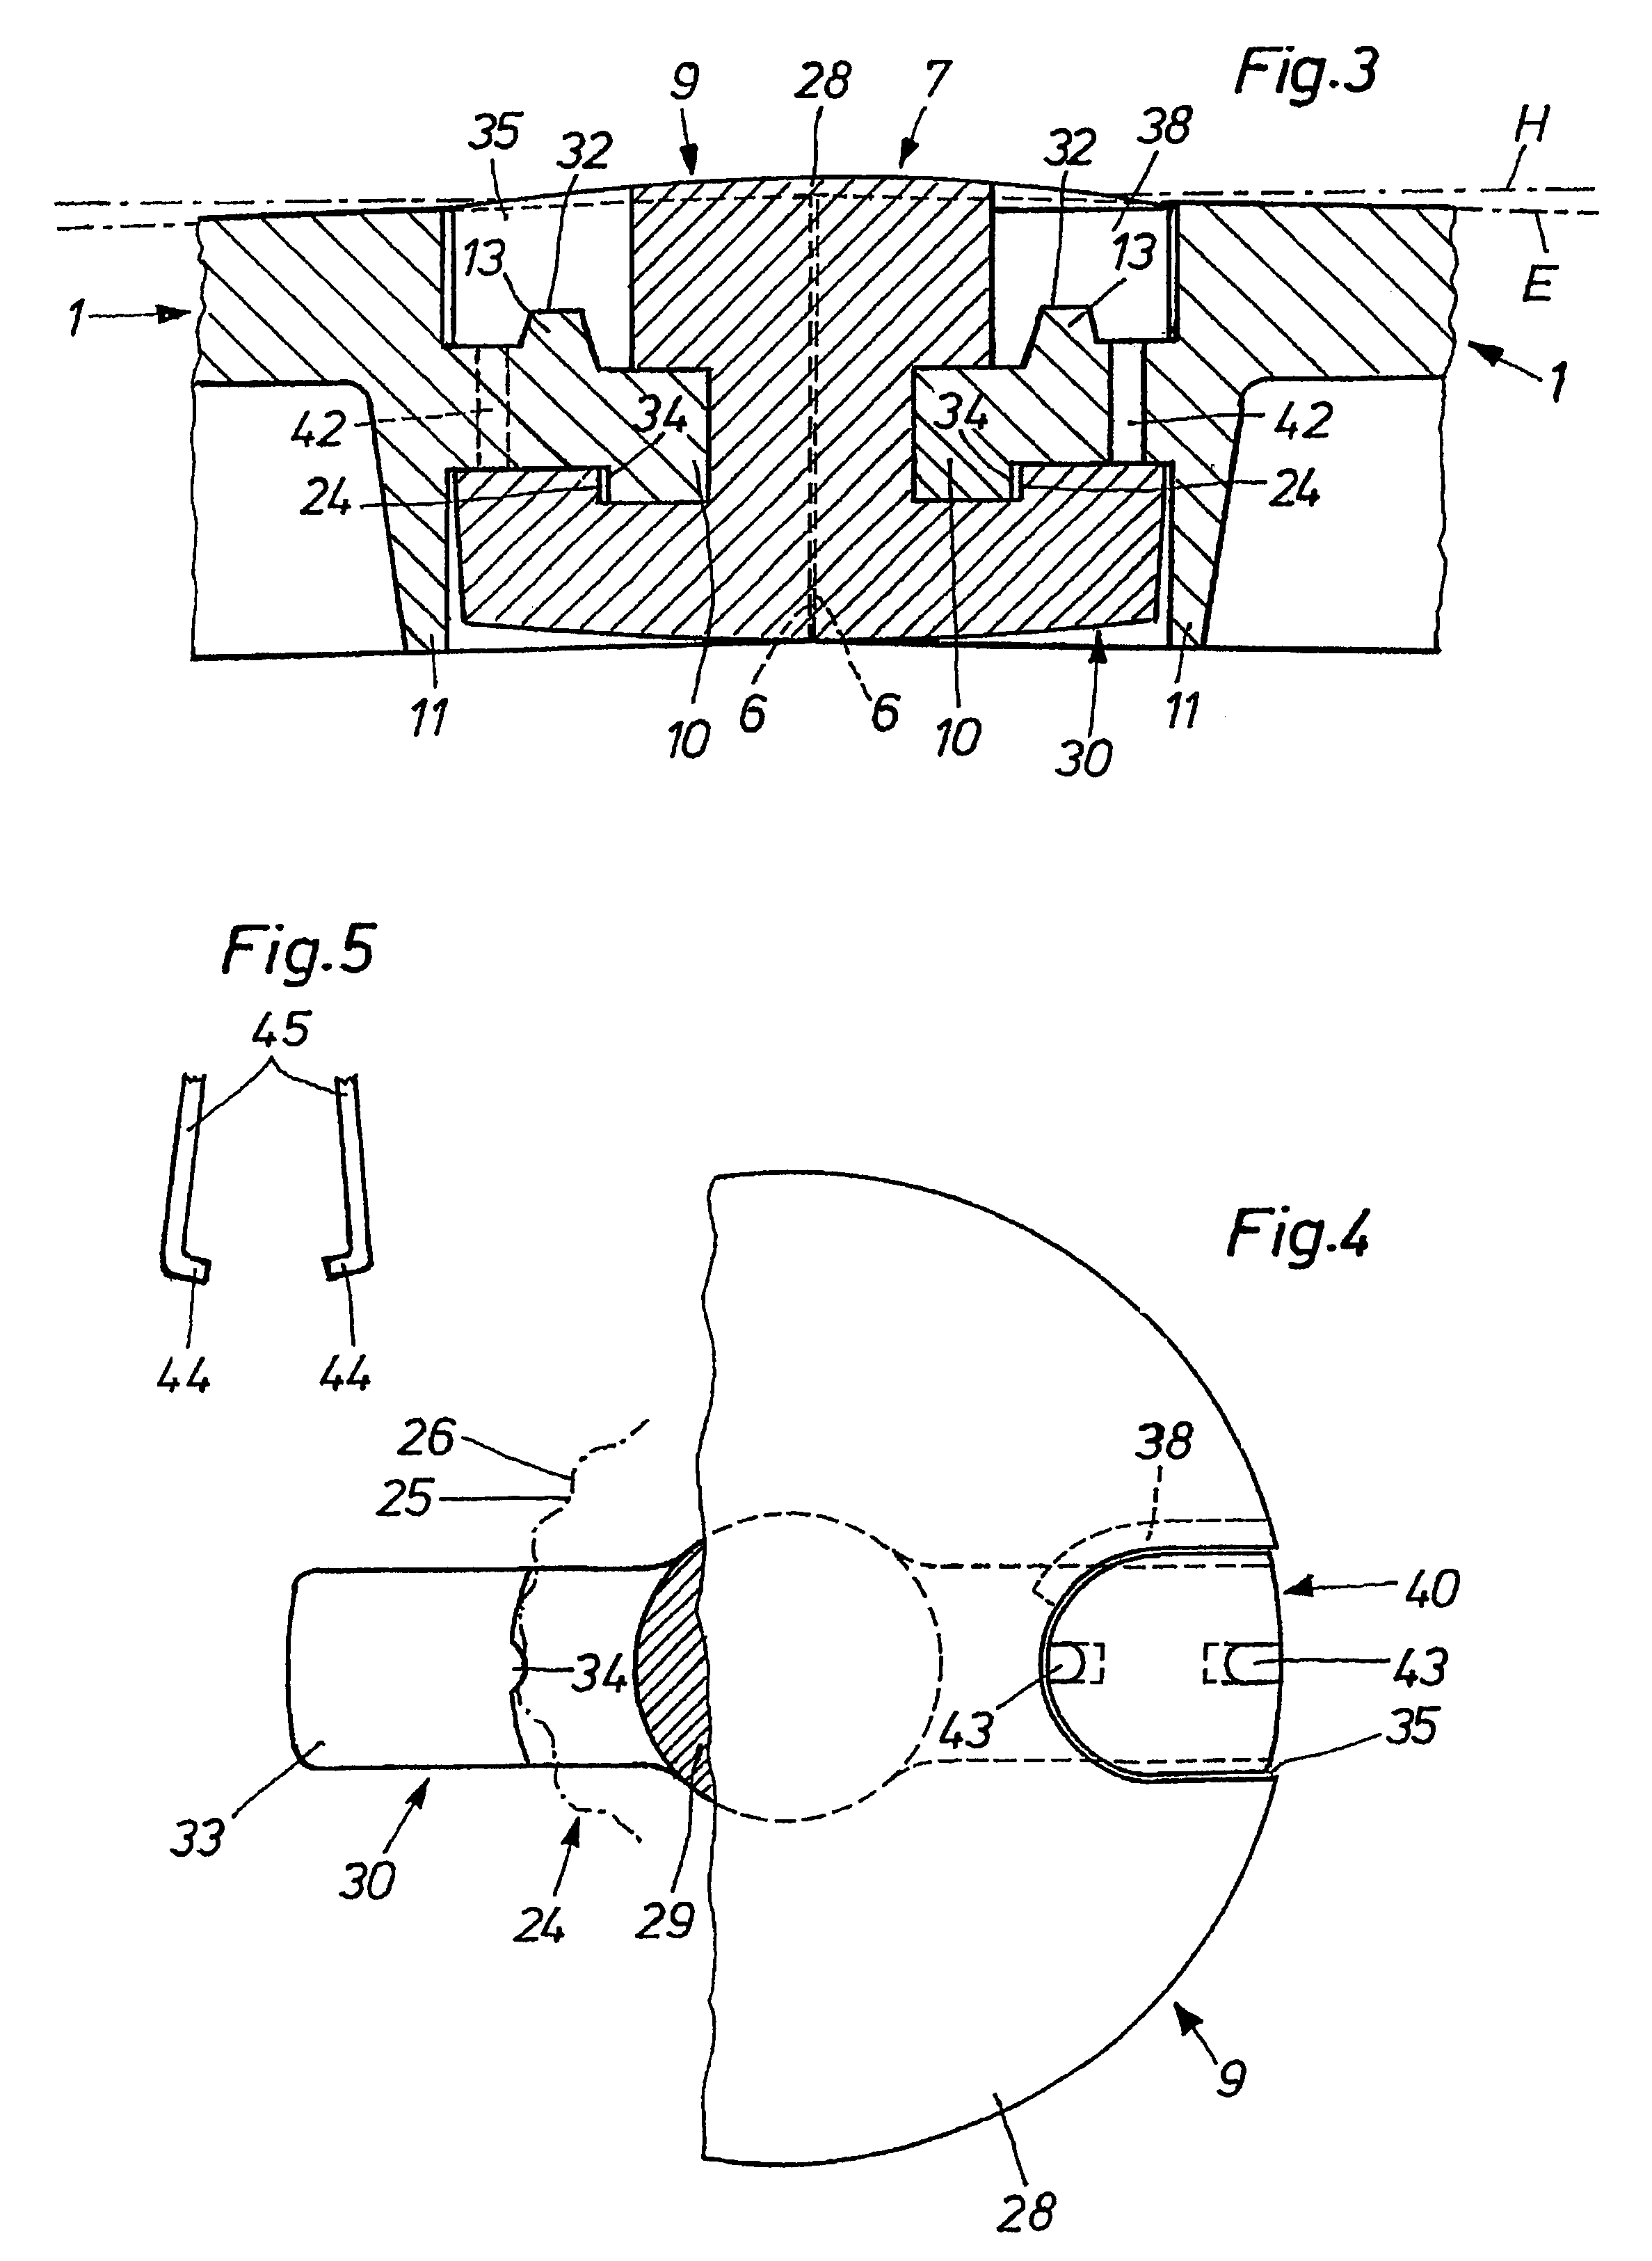 Tree grille system